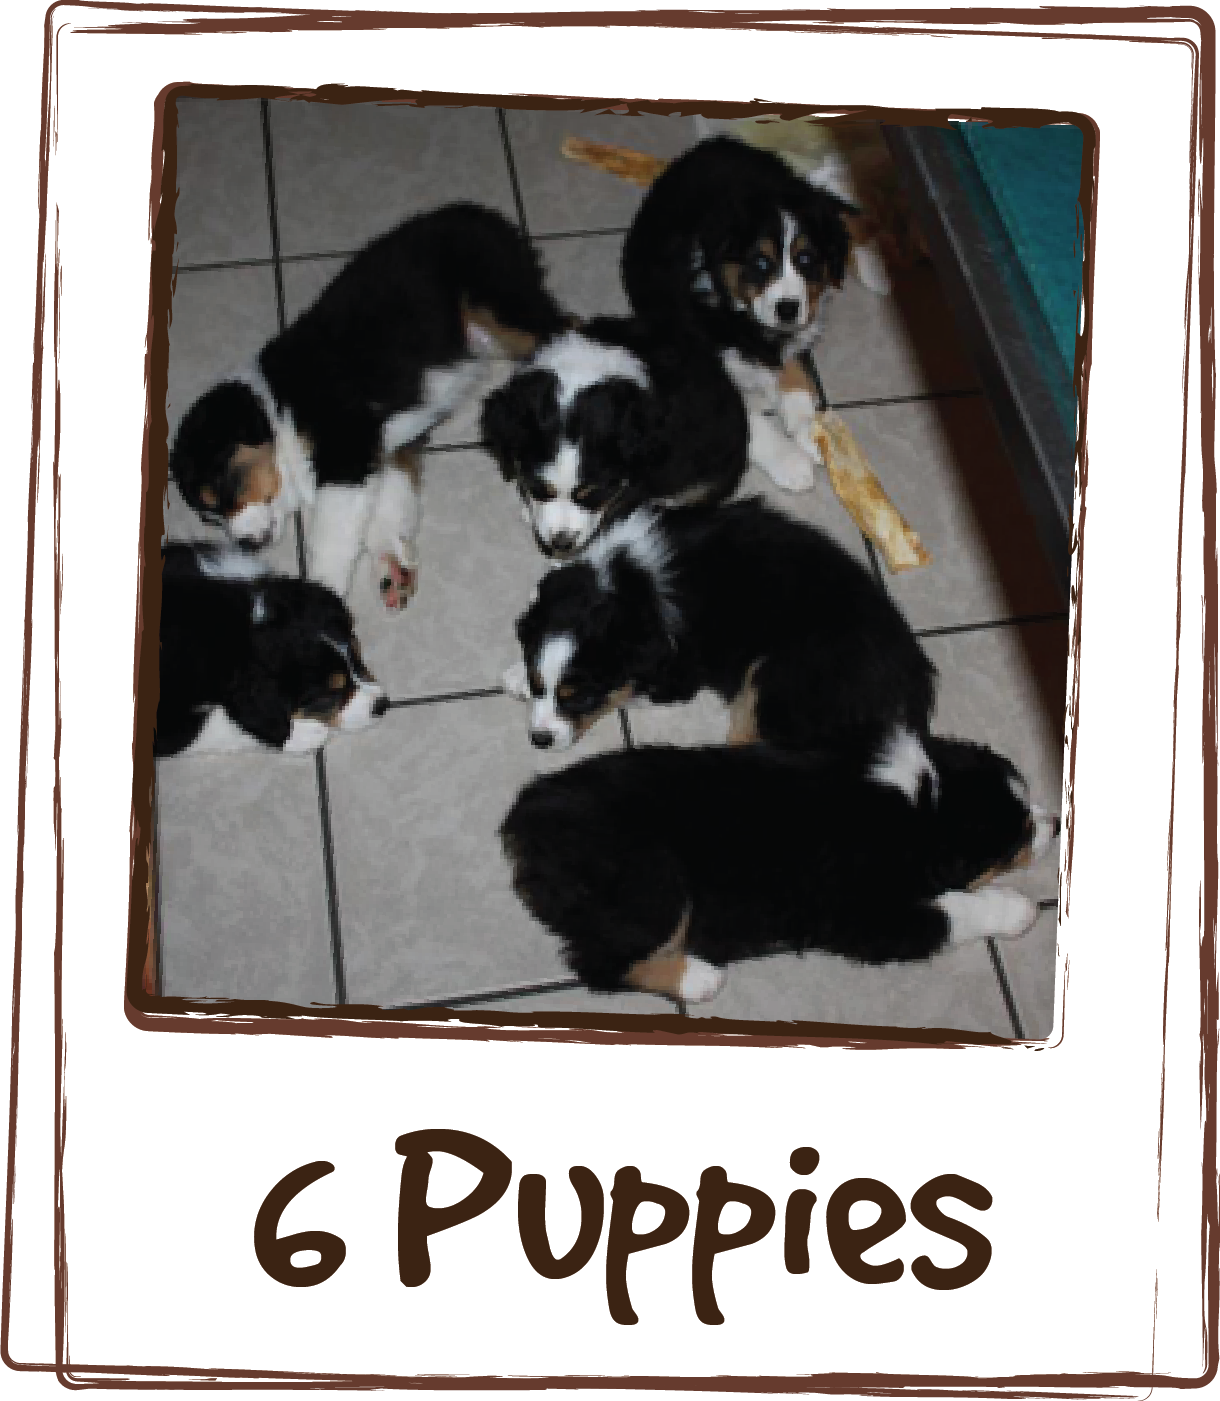  “Experiment successful! 6 puppies, 7.5 weeks old. LICKS® ZEN™ given 15 minutes prior to car ride. They were total angels at the eye doctor. Hardly any whining in the car, slept through their time at the clinic and slept on the way home. Yay for LICK